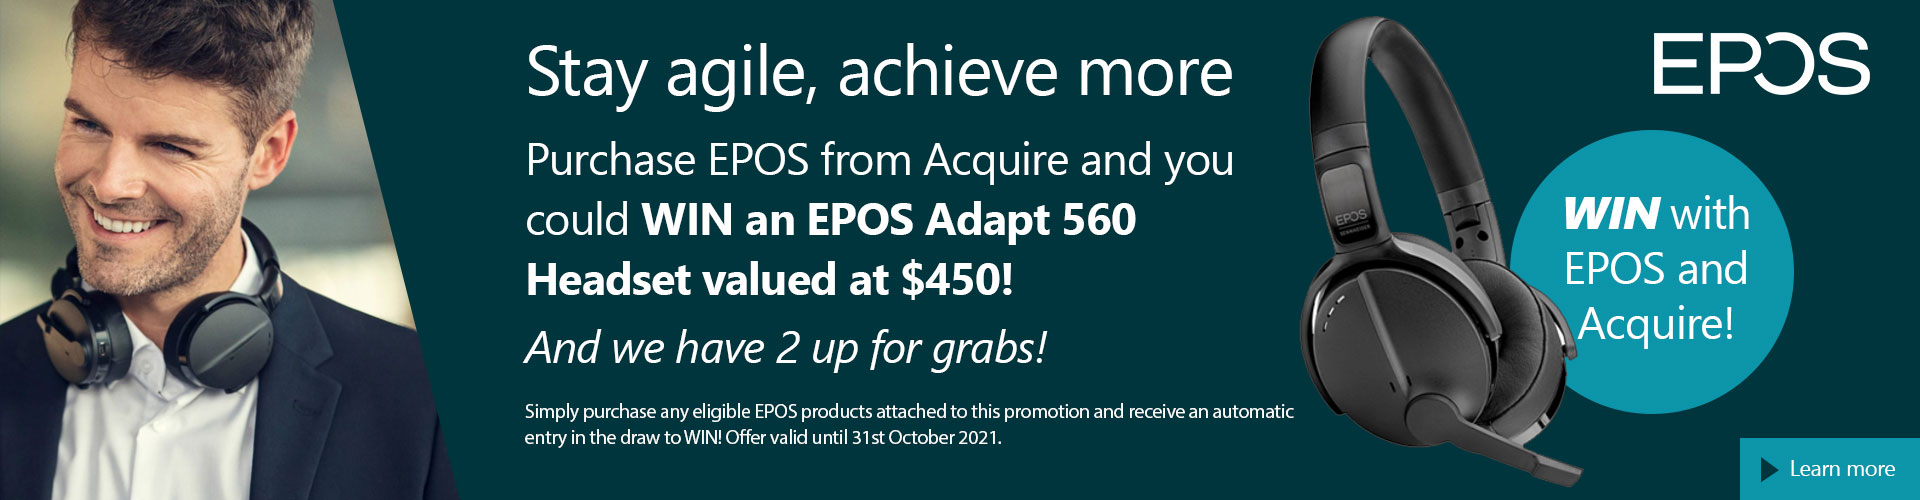 Purchase EPOS from Acquire and you could win an EPOS Adapt 560 headset valued at $450!